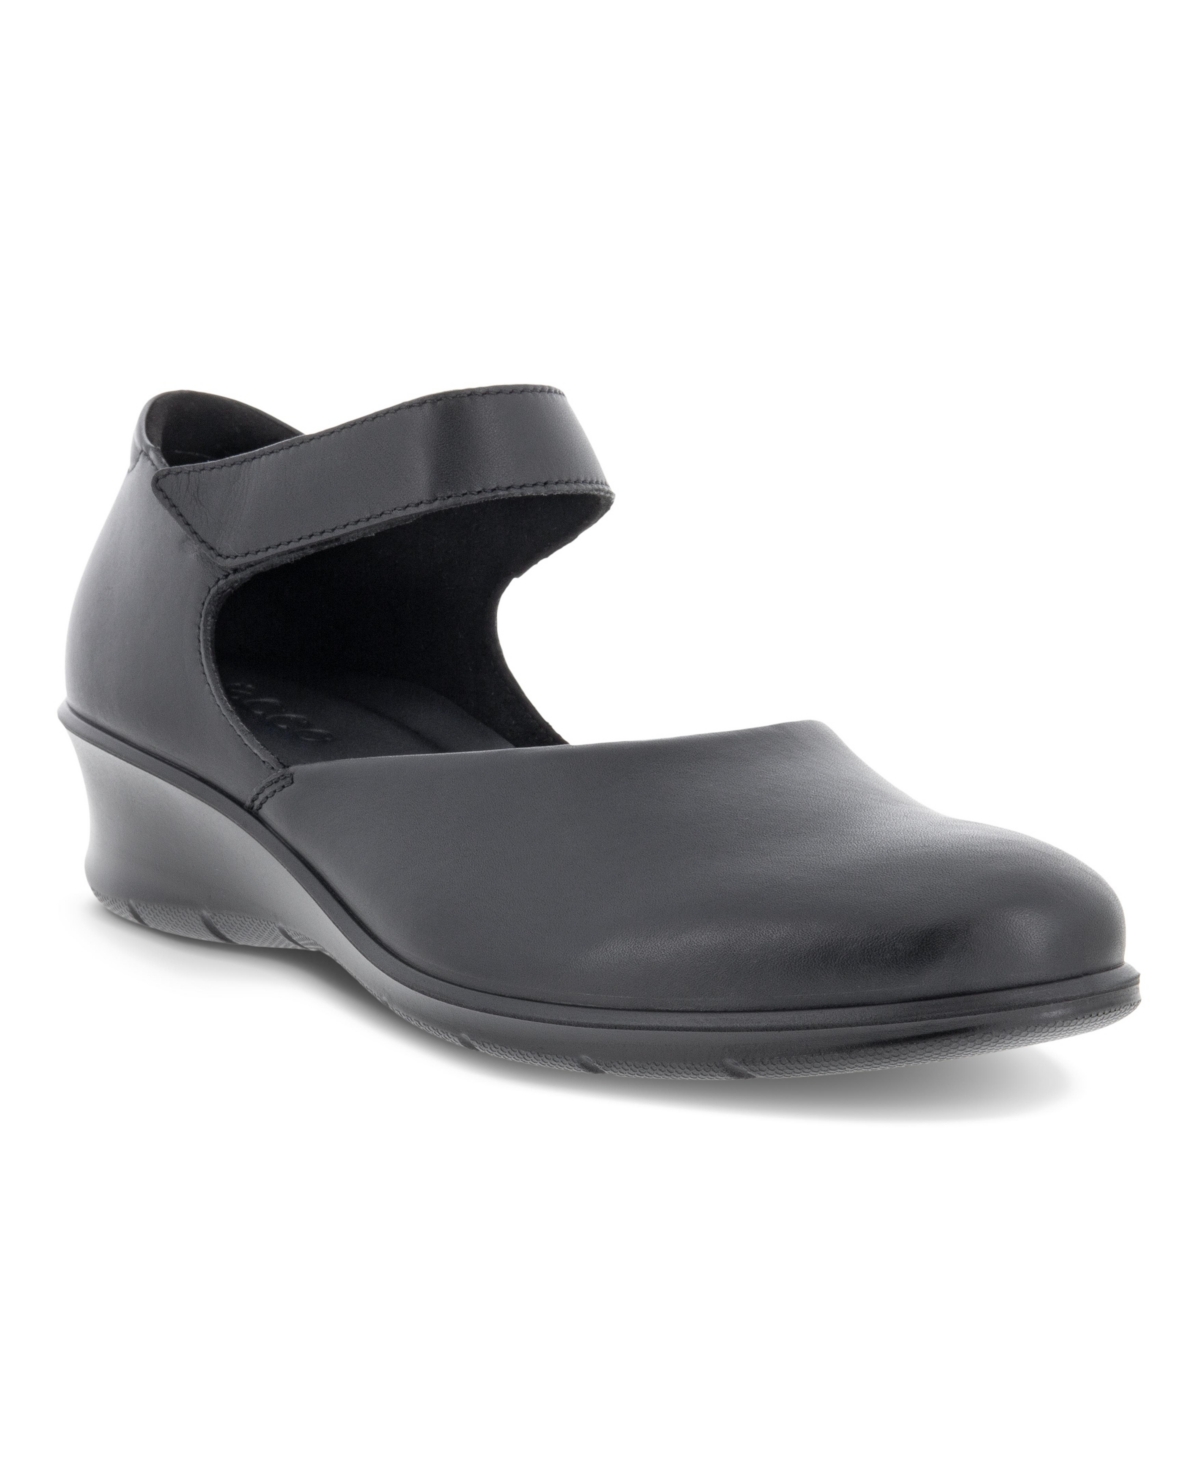 UPC 194891095716 product image for Ecco Women's Felicia Mary Jane Flats Women's Shoes | upcitemdb.com